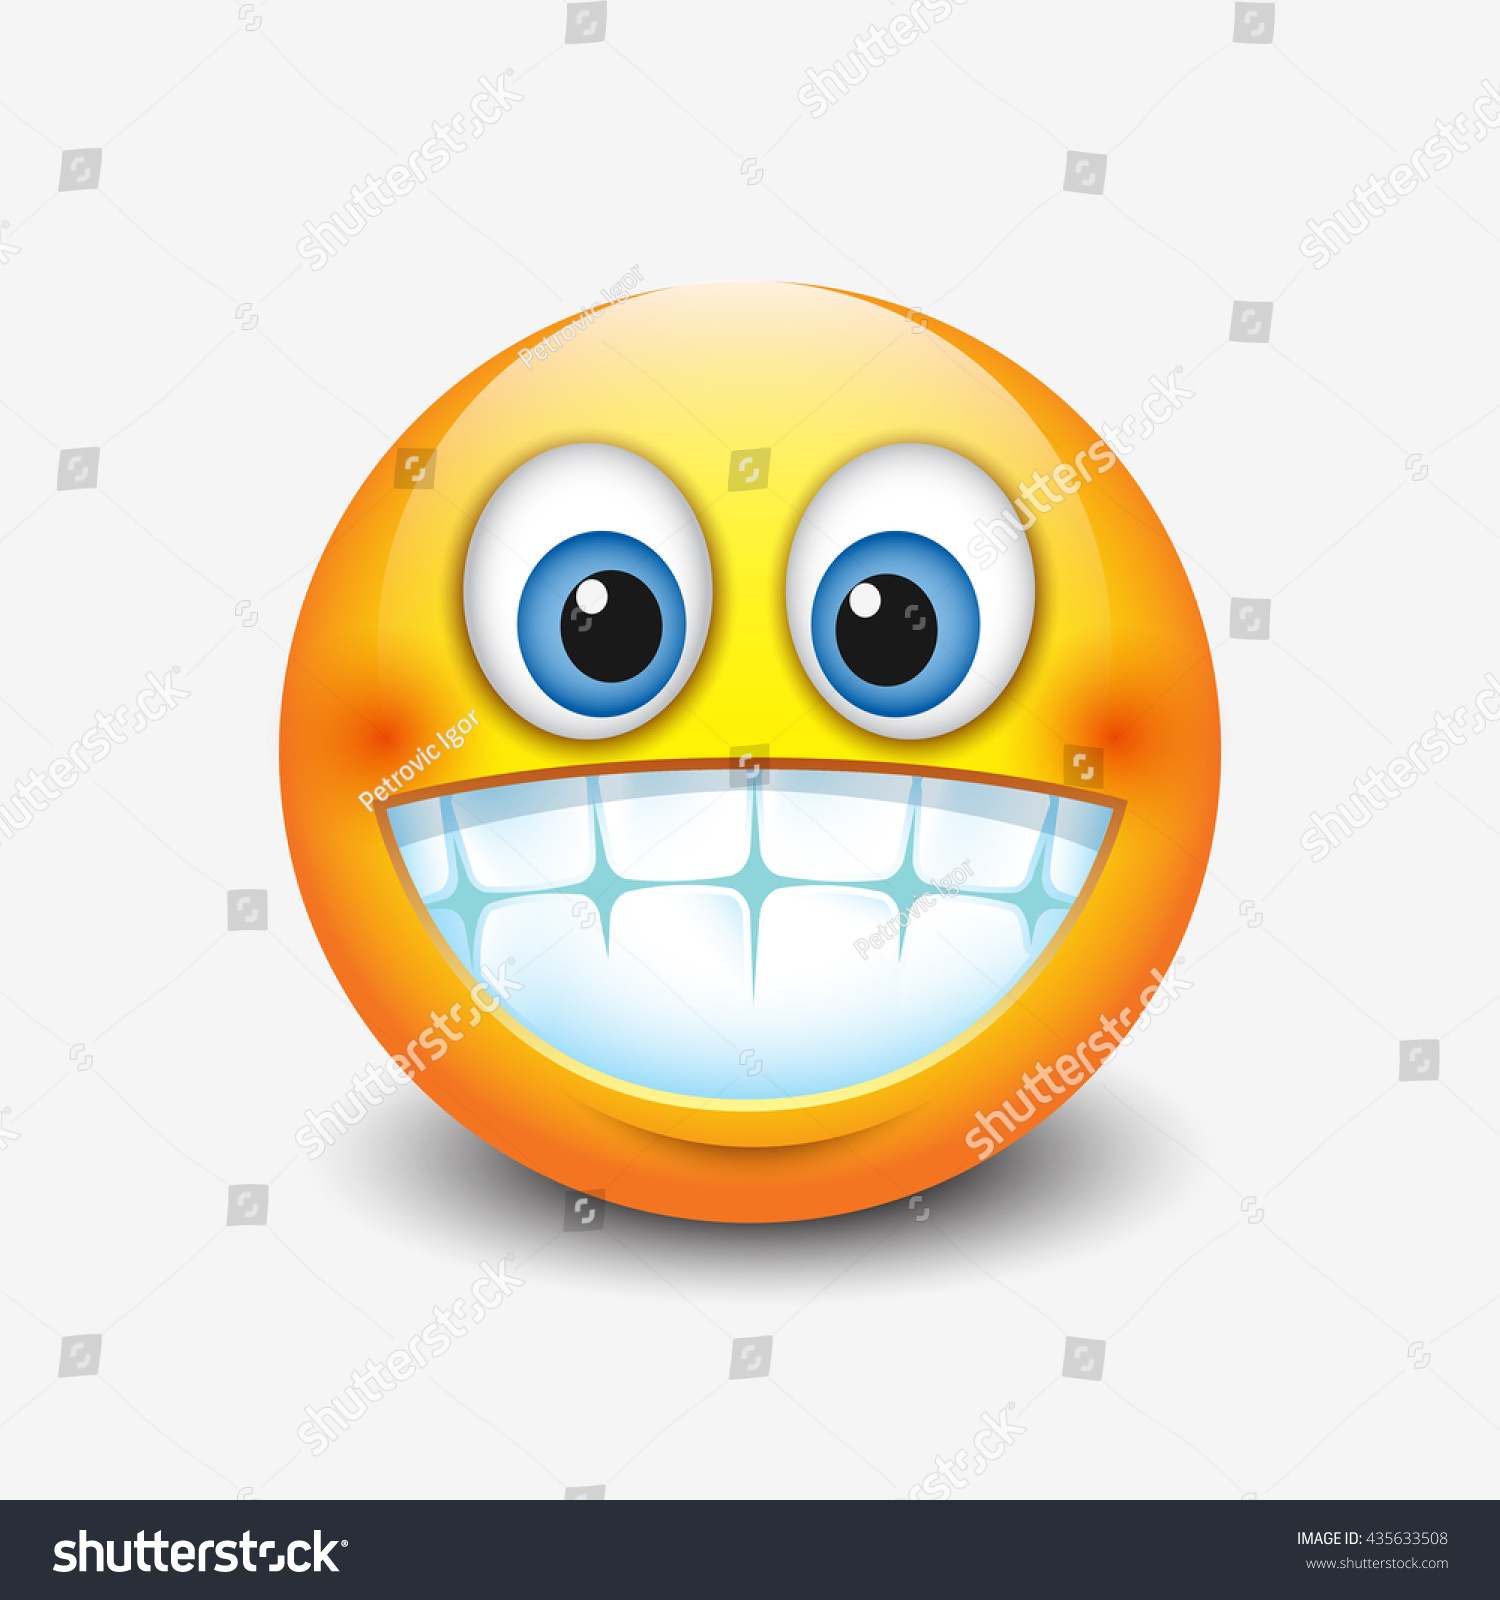 Cute Smiling Grinning Emoticon Showing Teeth Stock Vector 435633508 ...